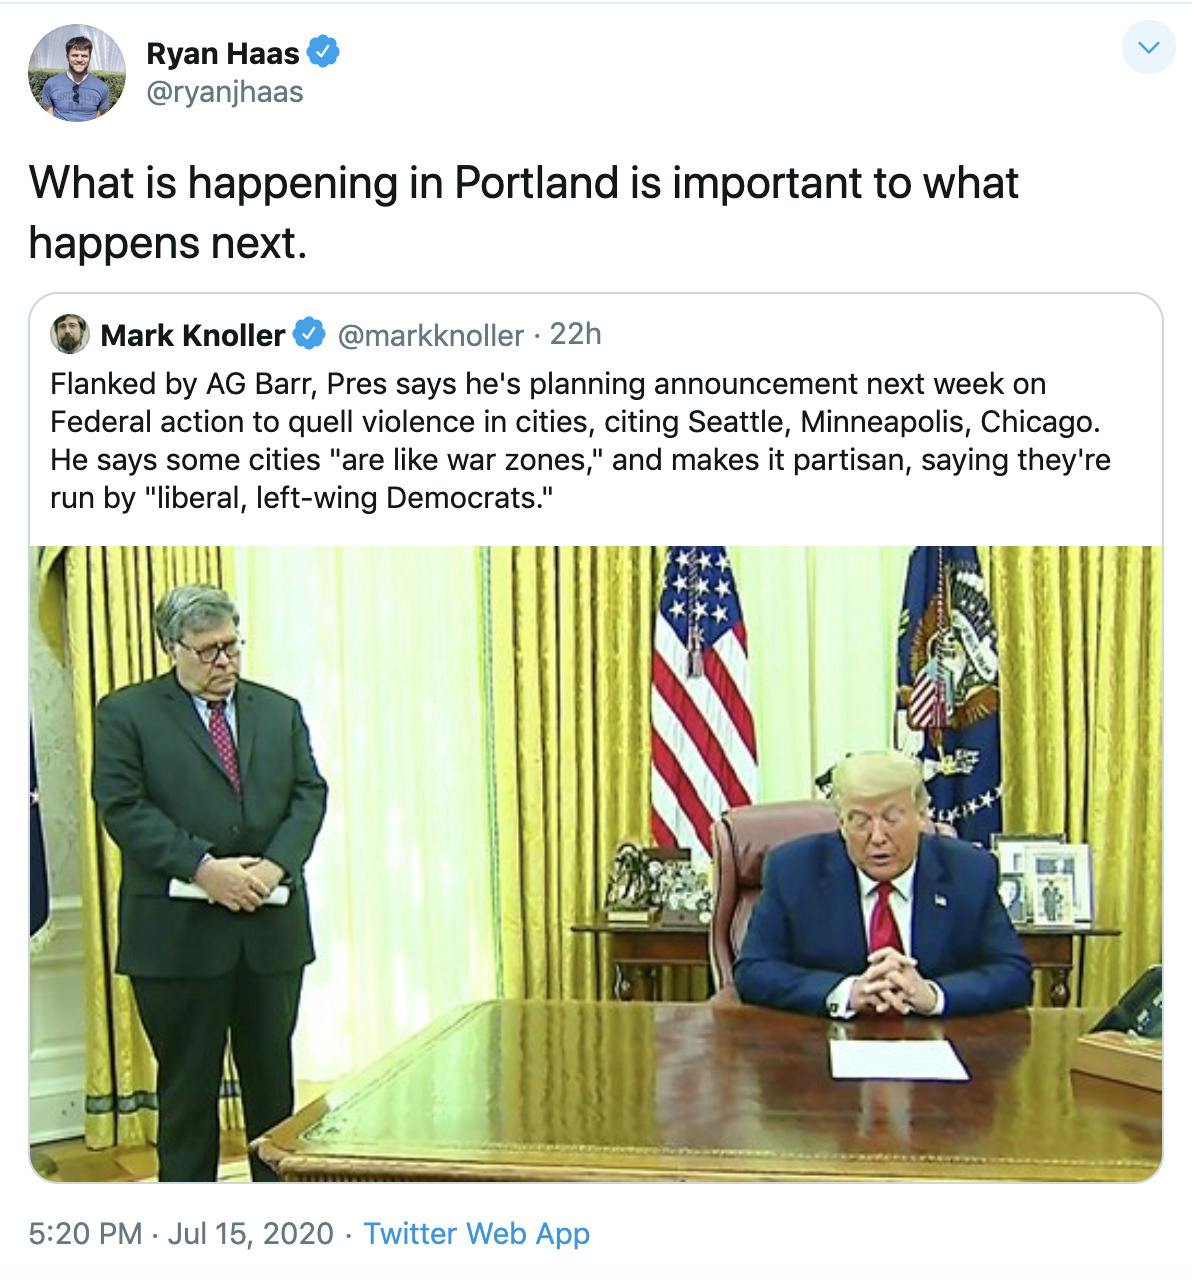 Ryan Haas 'What is happening in Portland is important to what happens next.' attached to tweet by Mark Knoller saying 'Flanked by AG Barr, Pres says he's planning announcement next week on Federal action to quell violence in cities, citing Seattle, Minneapolis, Chicago. He says some cities 'are like war zones,' and makes it partisan, saying they're run by 'liberal, left-wing Democrats.'